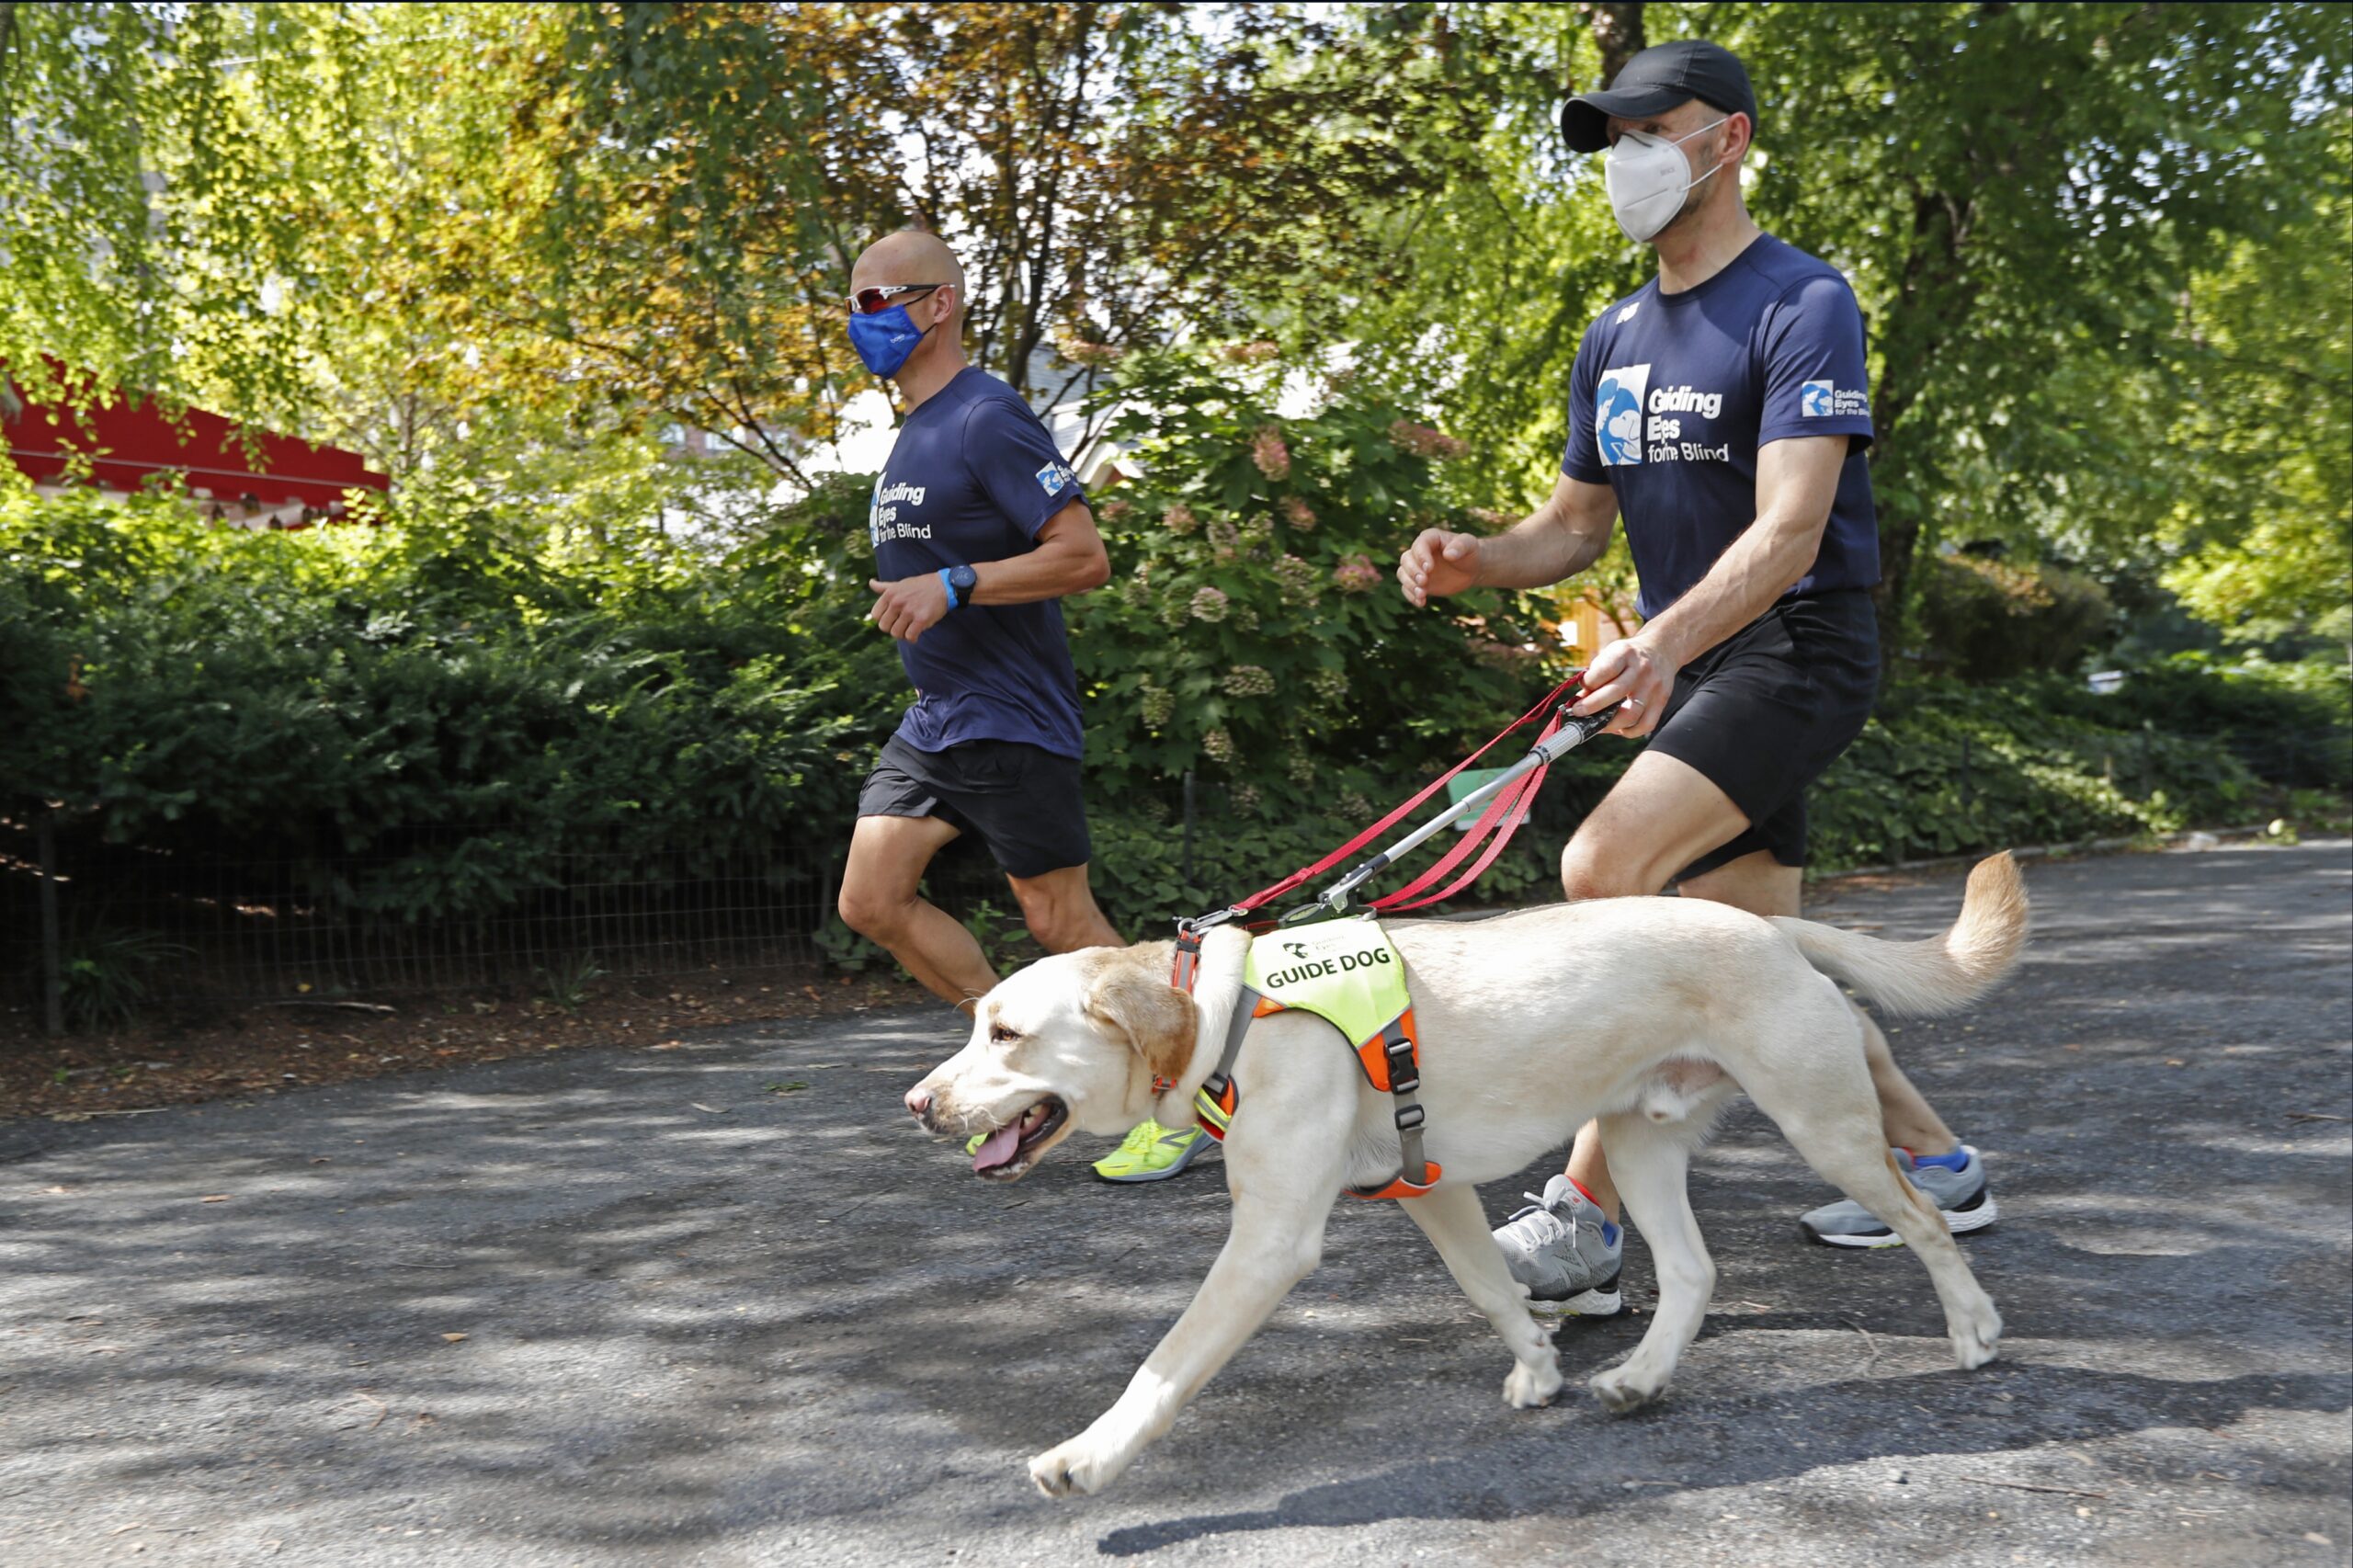 Blind man runs with guide dog